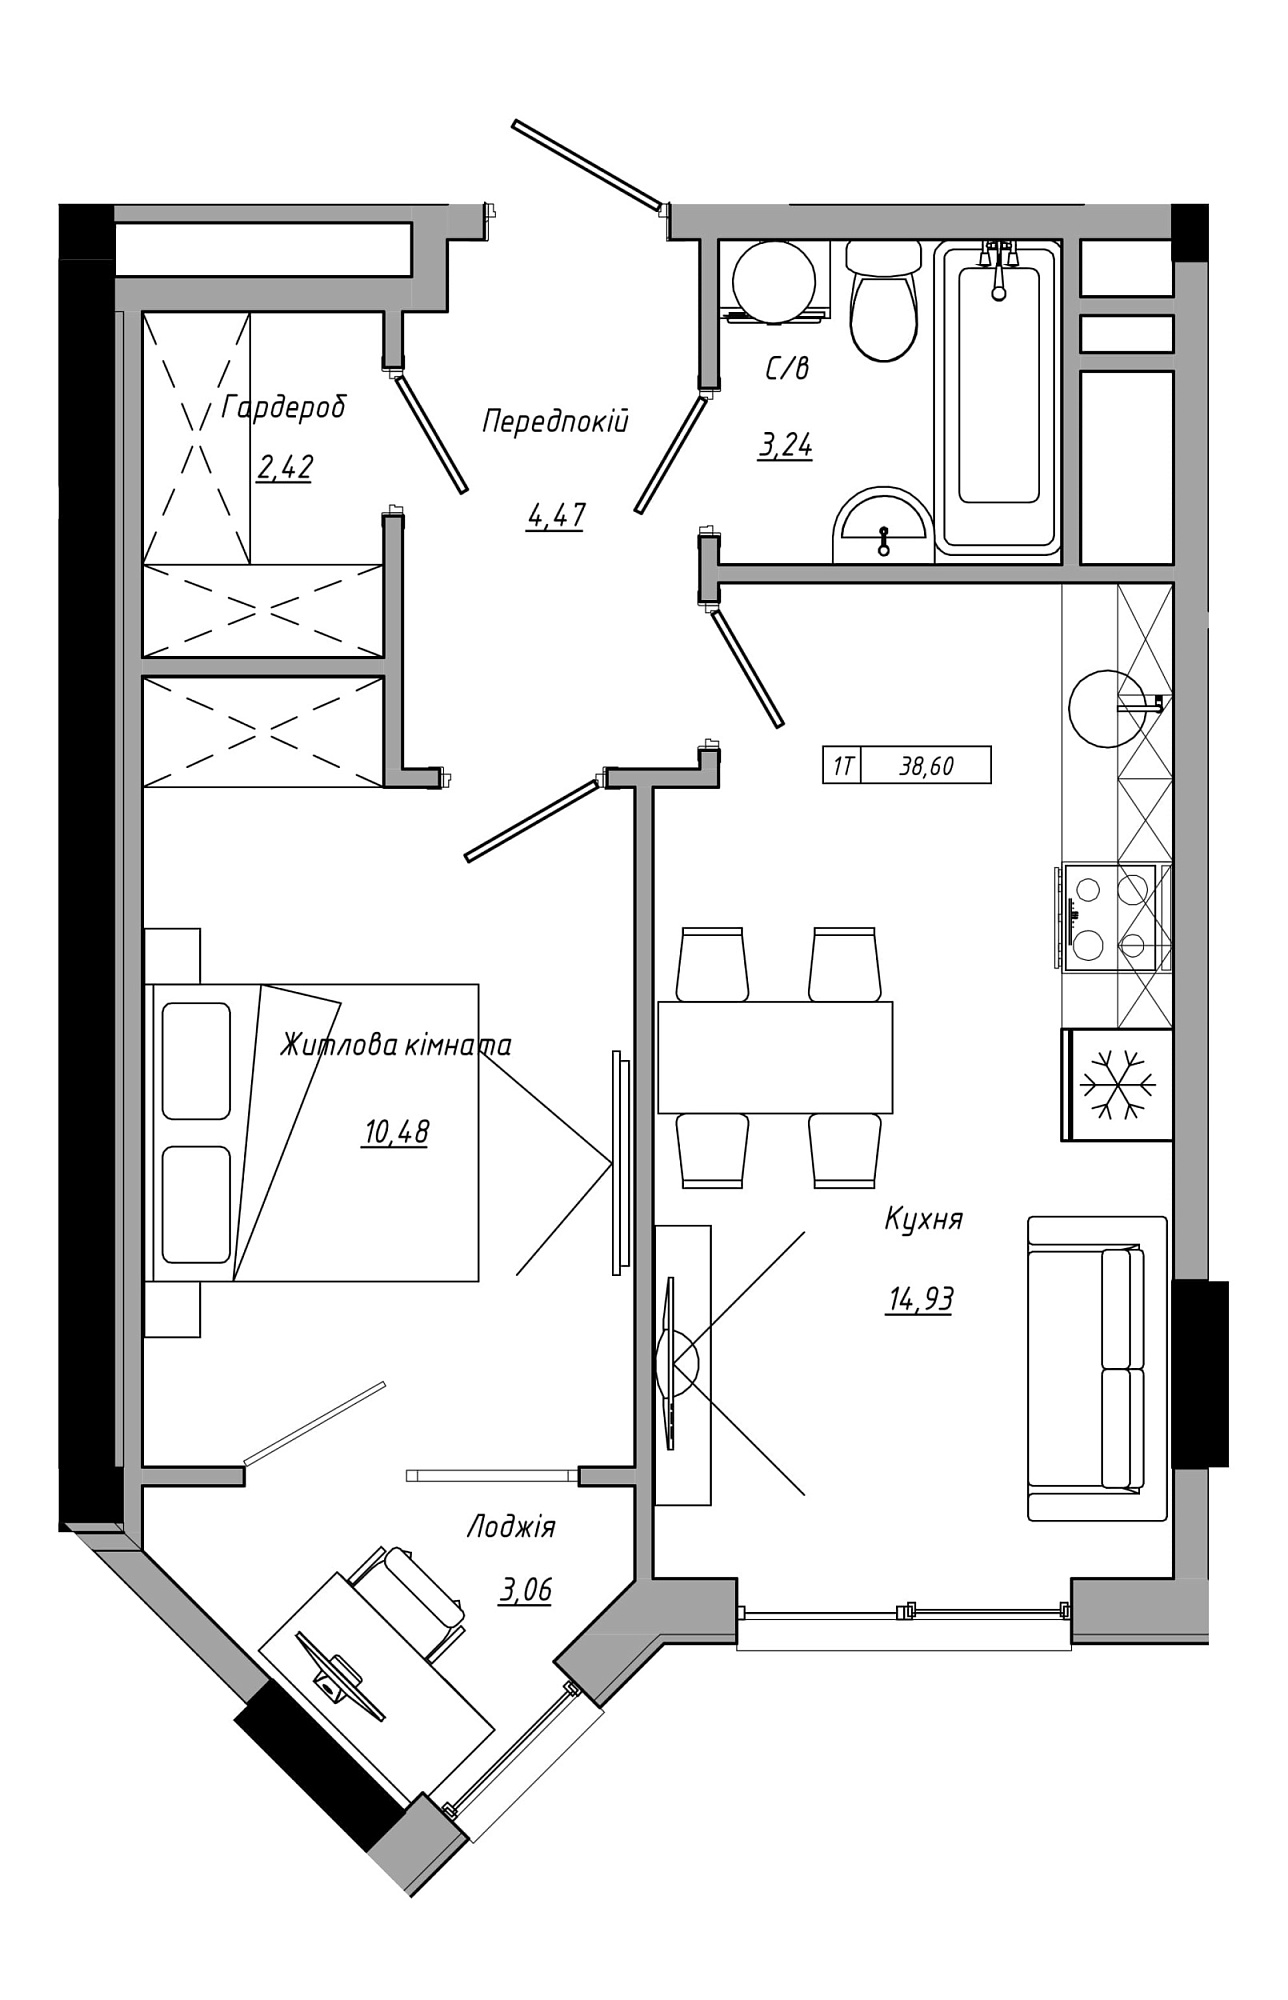 Planning 1-rm flats area 38.6m2, AB-21-06/00022.